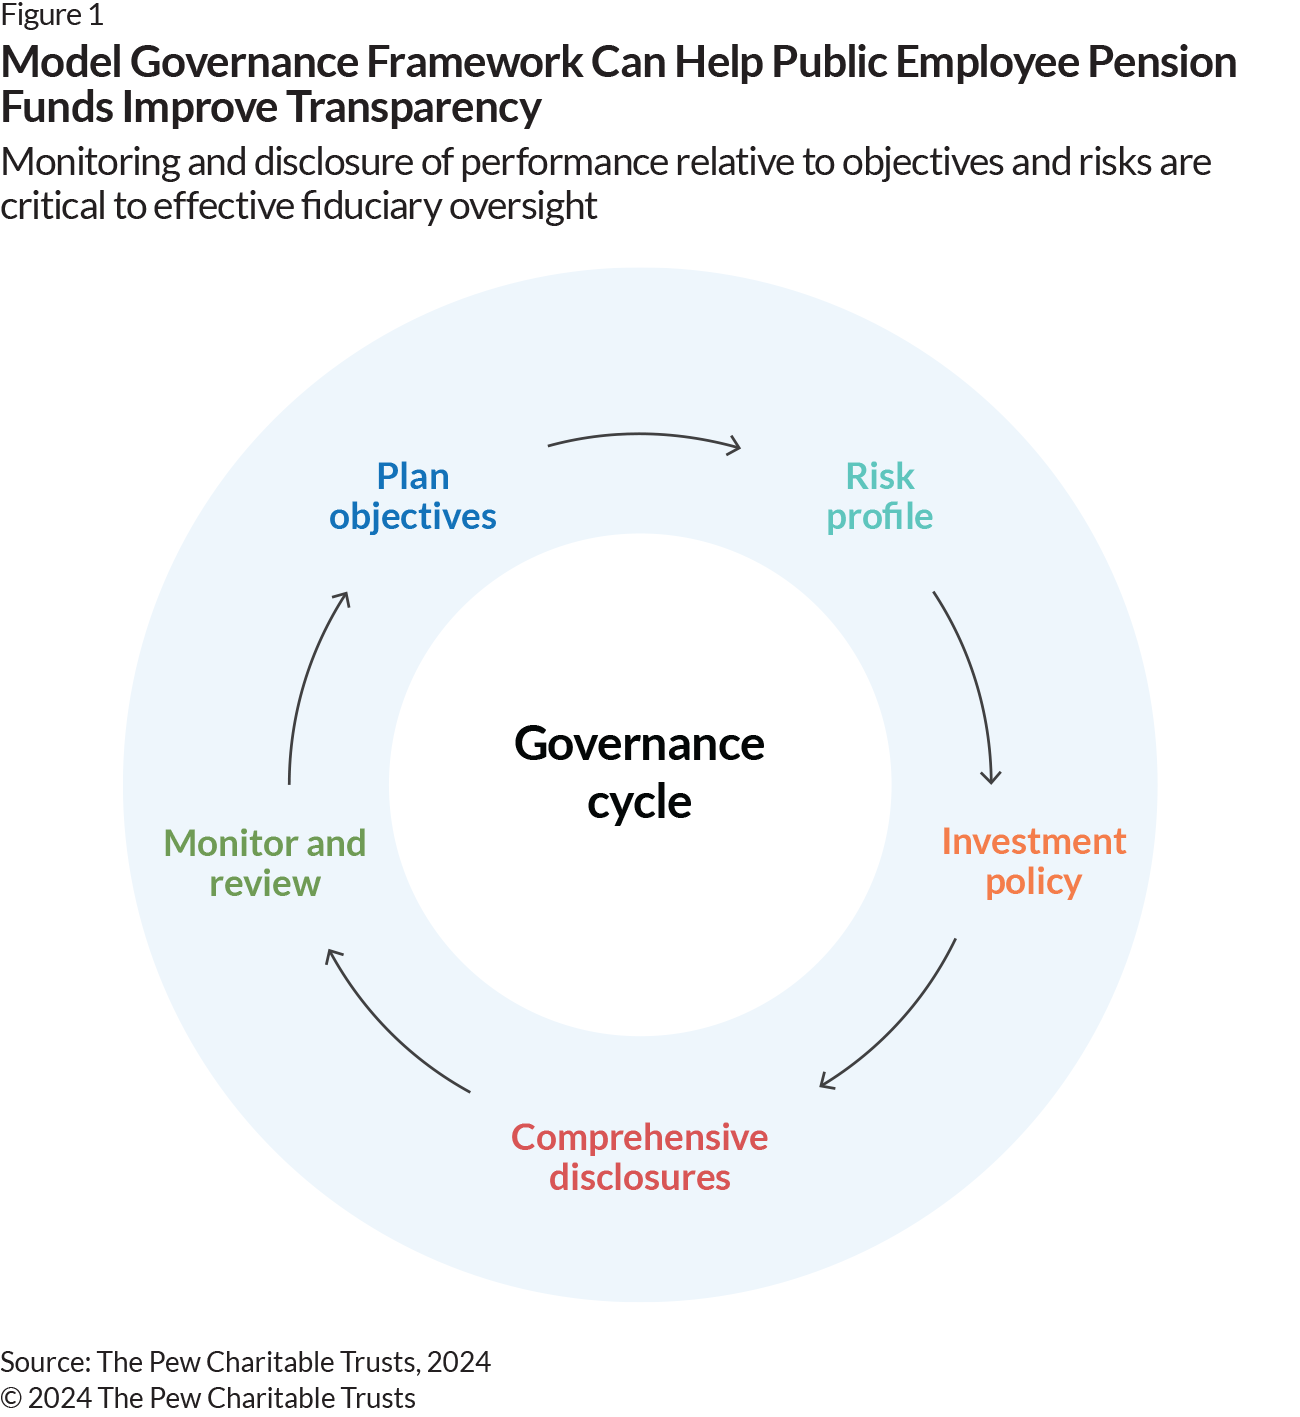 A circular diagram of Pew’s model governance framework with arrows pointing at each phase of the cycle. The graphic shows a cycle that flows from plan objectives to risk profile to investment policy to comprehensive disclosures to monitoring and review and then back to plan objectives. 